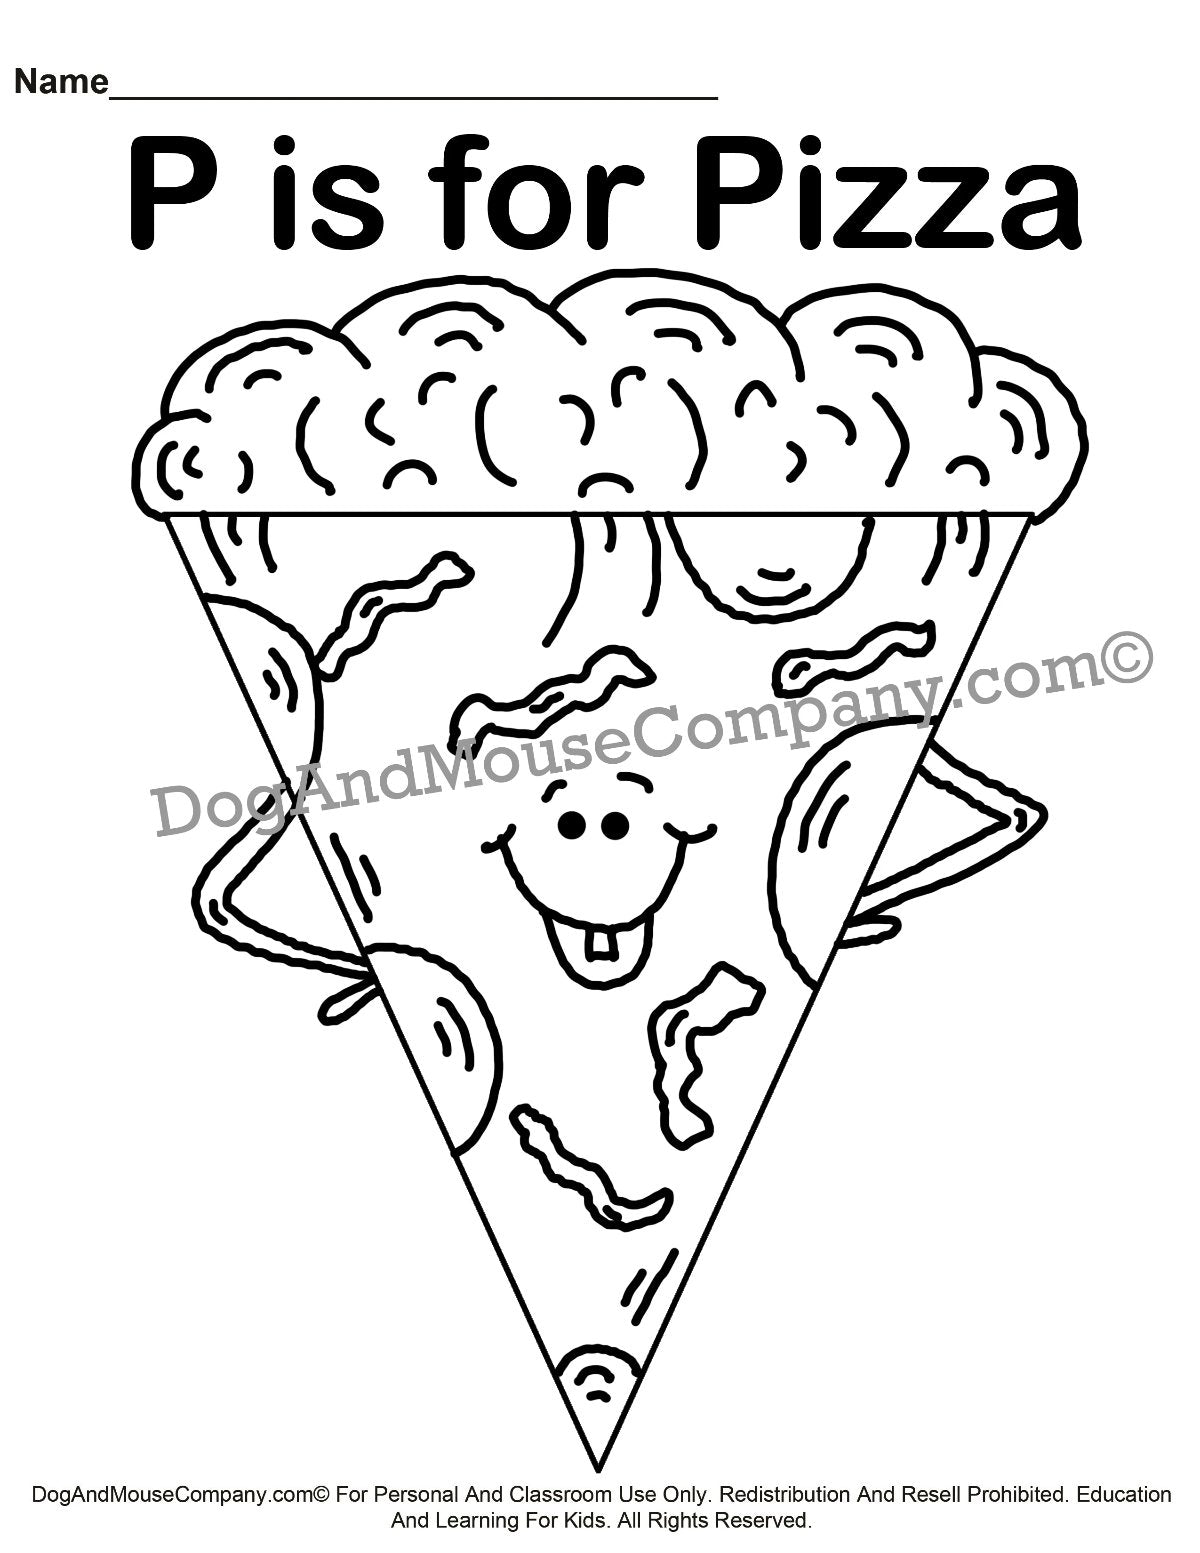 p-is-for-pizza-coloring-page-learn-your-abc-s-worksheet-printable-dog-and-mouse-company